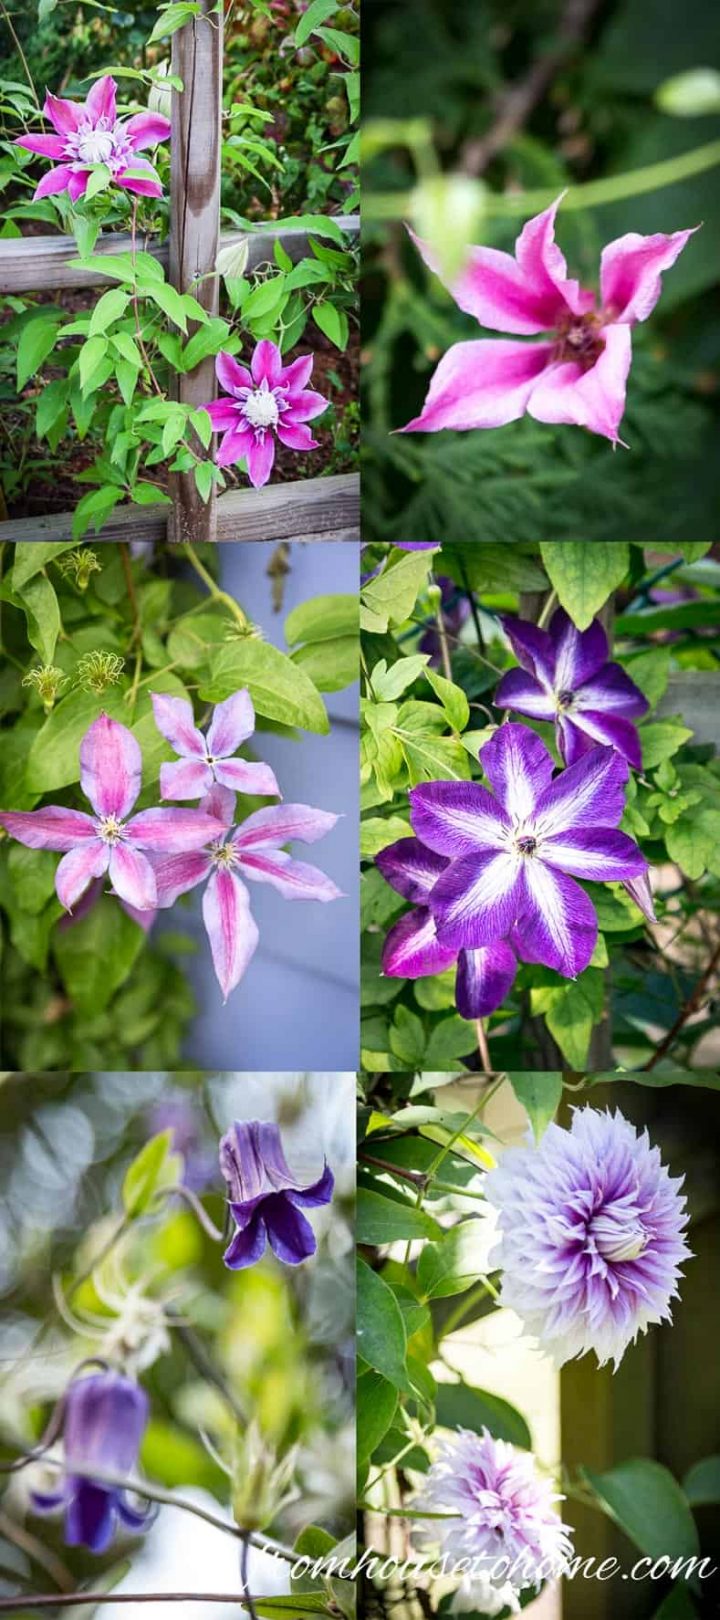 A collage of Clematis flowers